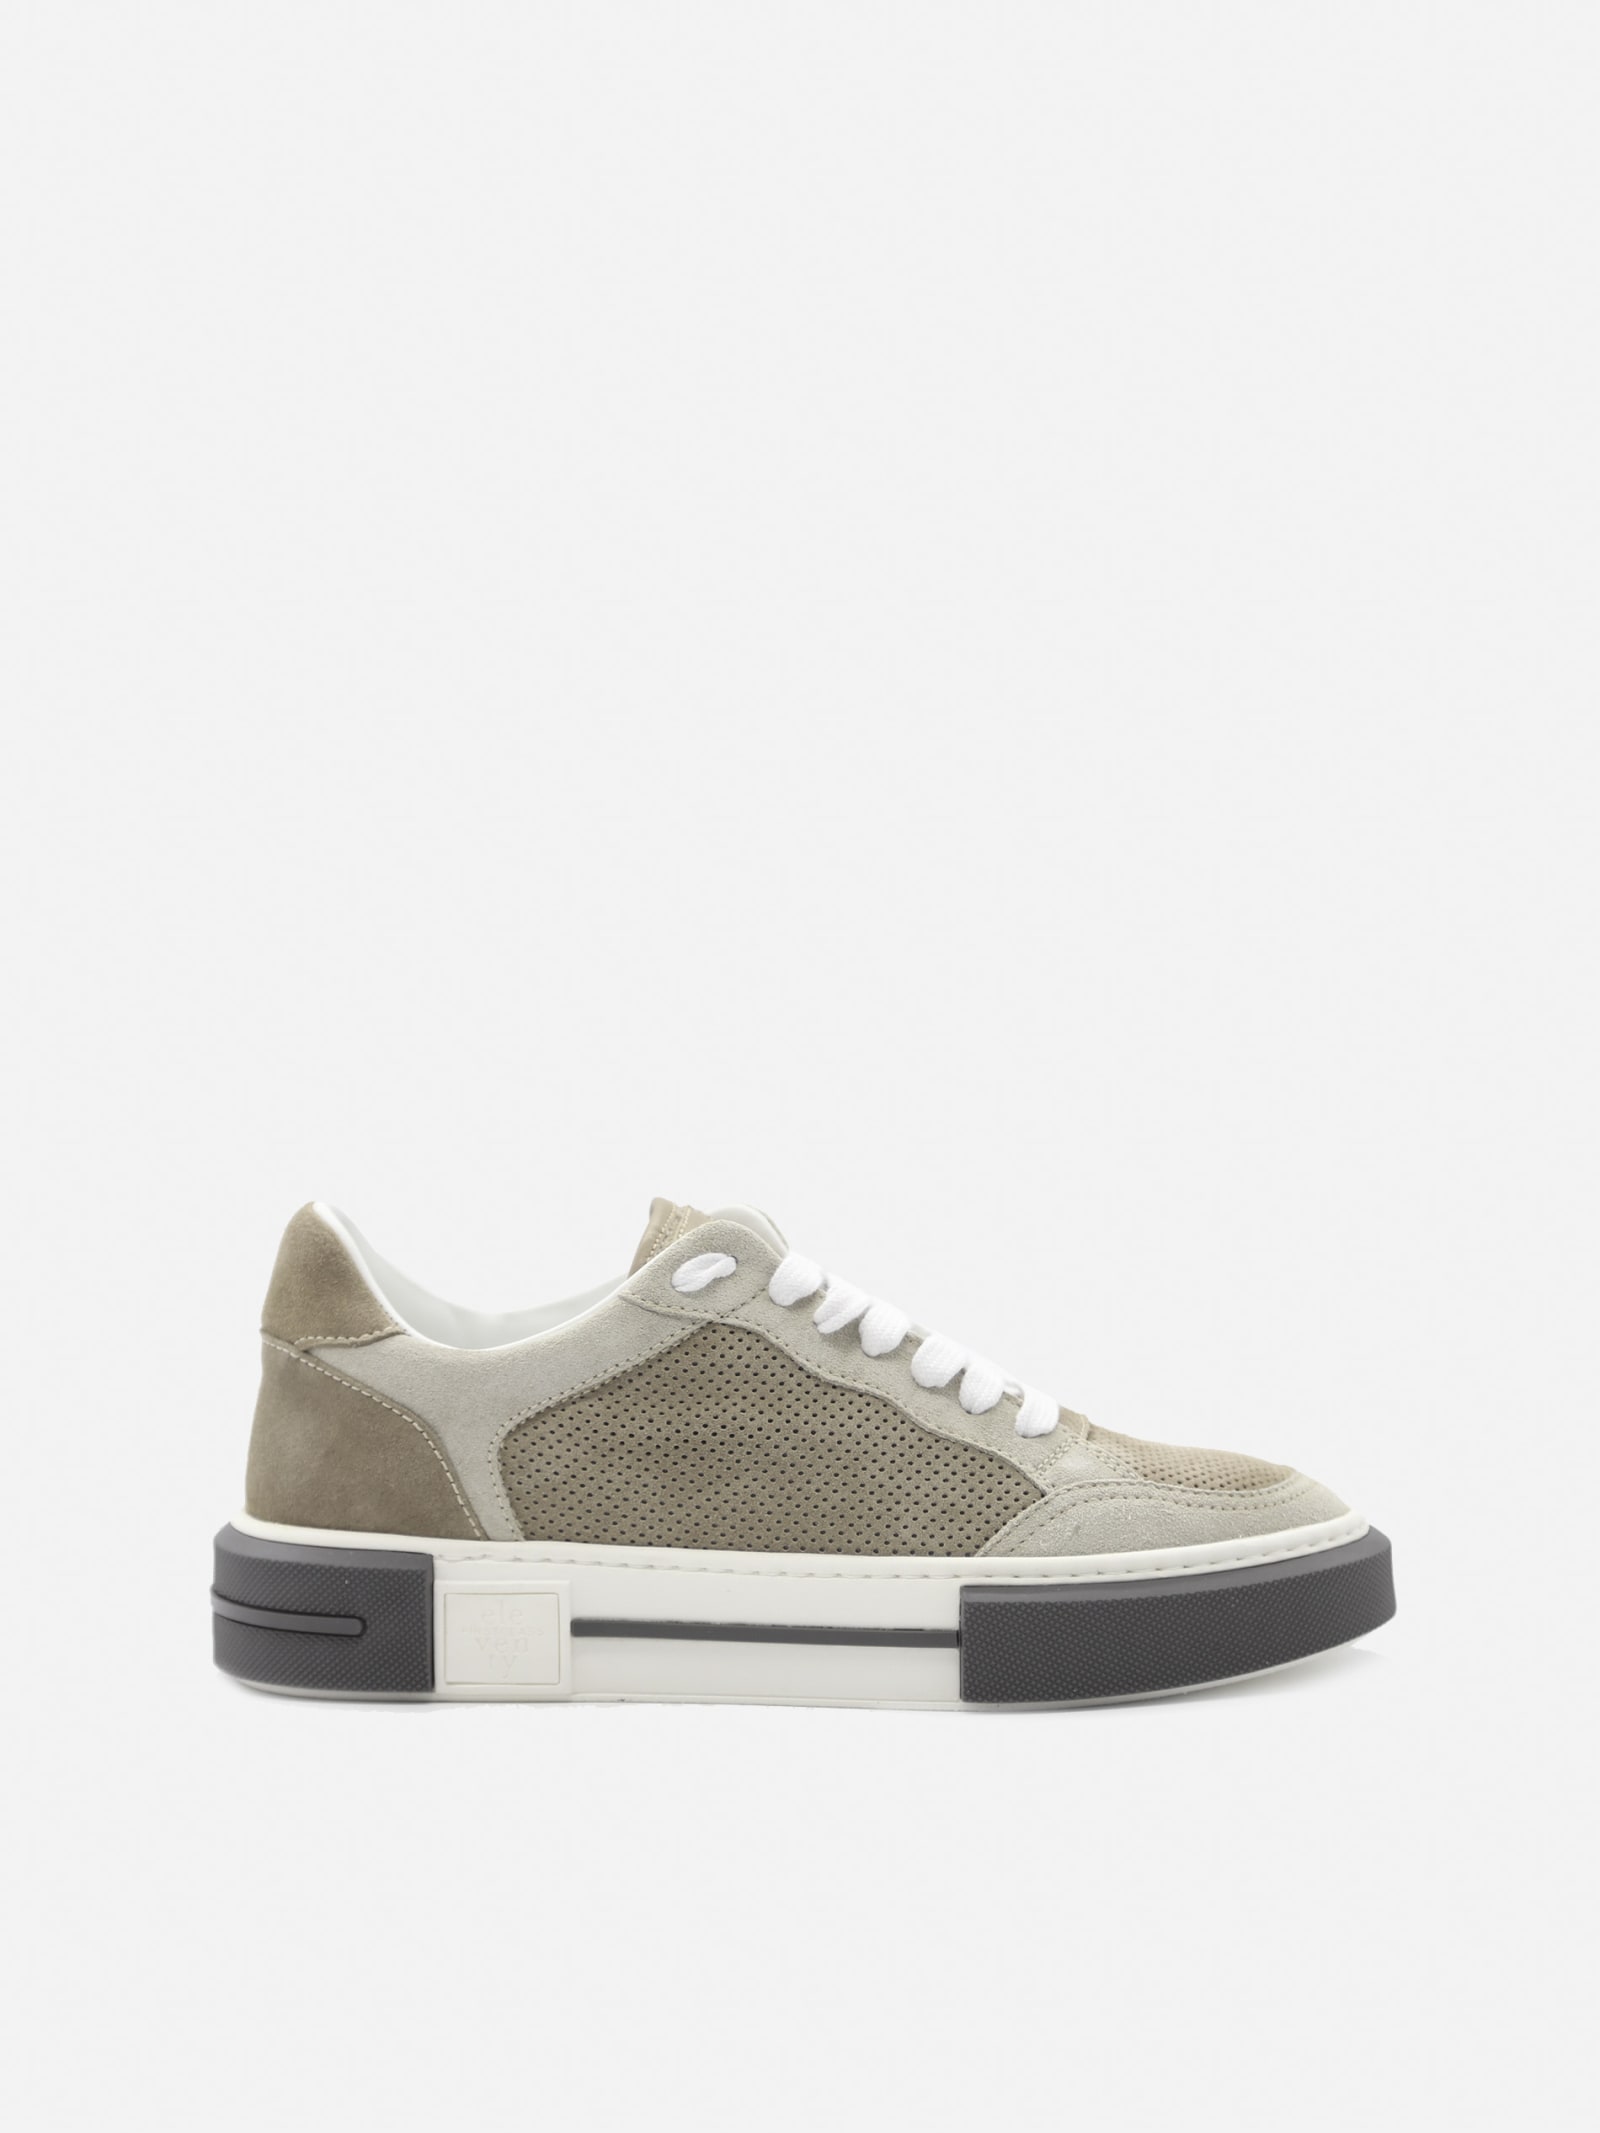 Eleventy Leather Sneakers With Perforated Details